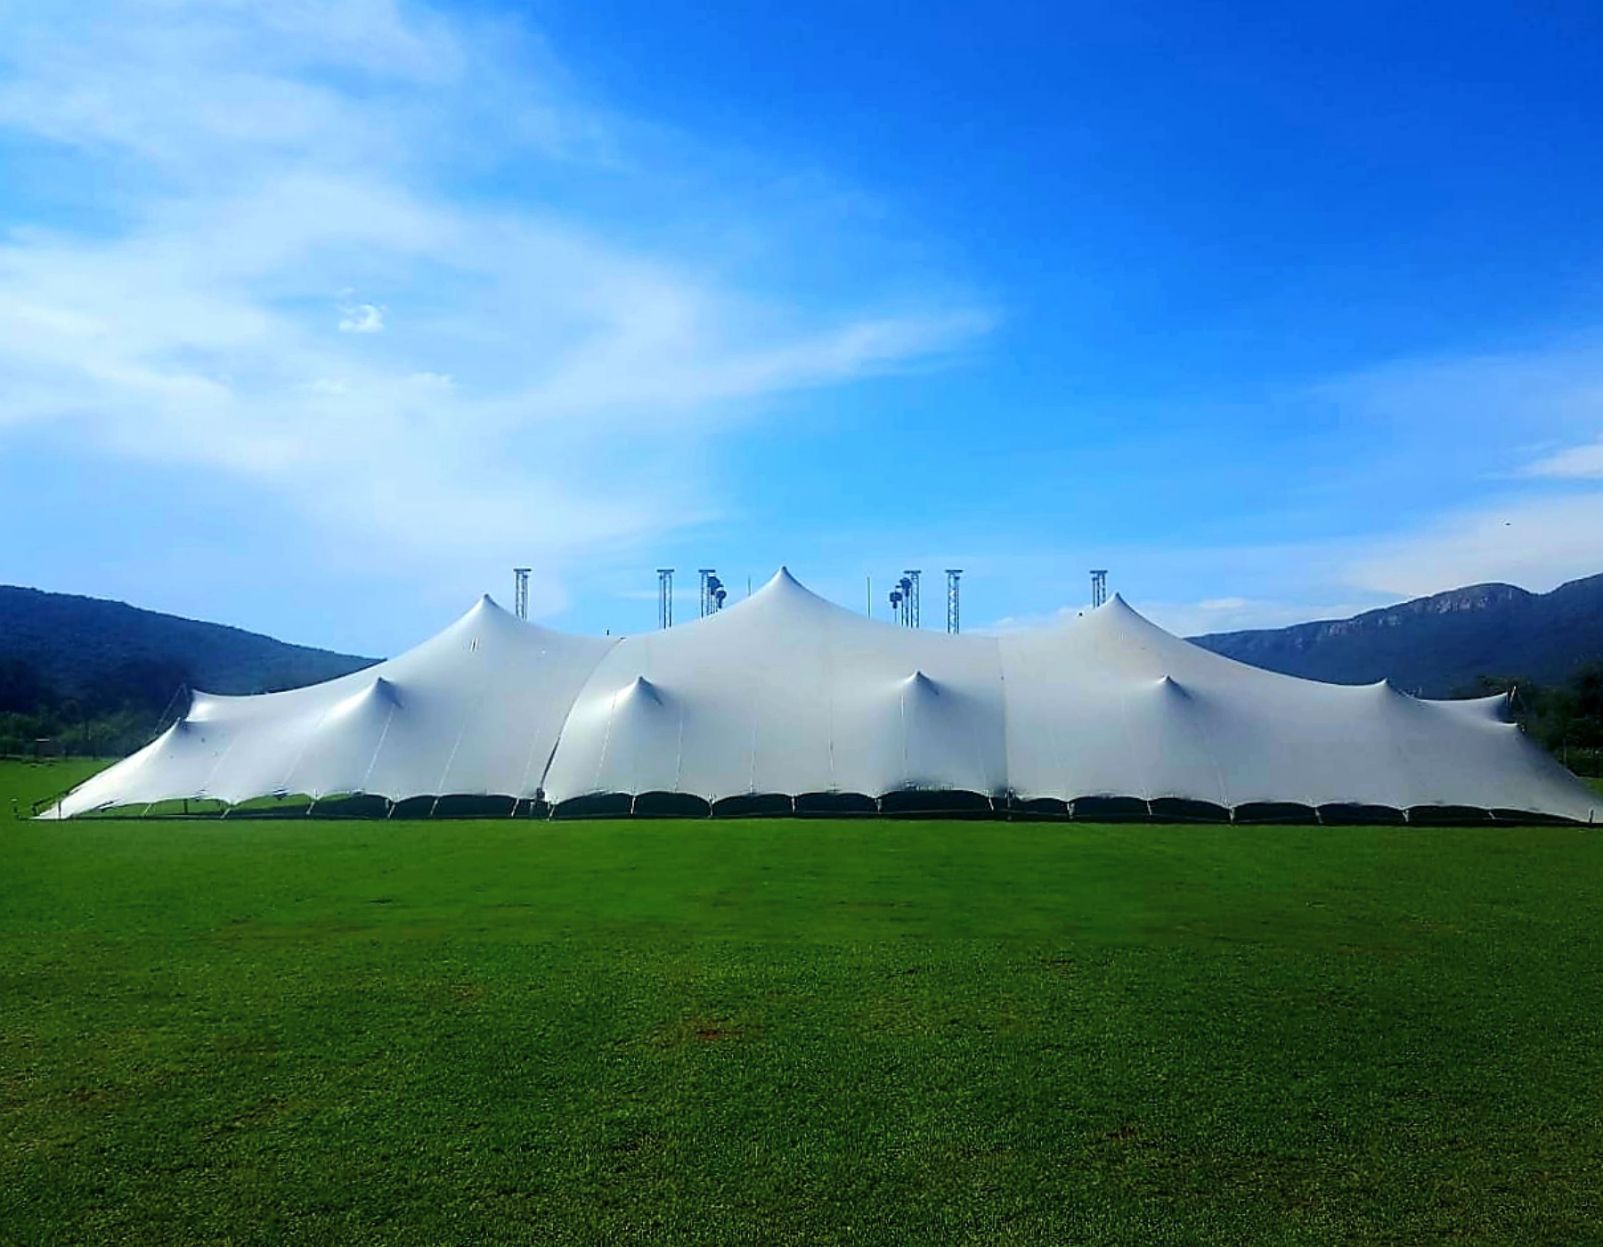 Large Stretch Tent On A Sports Field With Mountains In The Background.